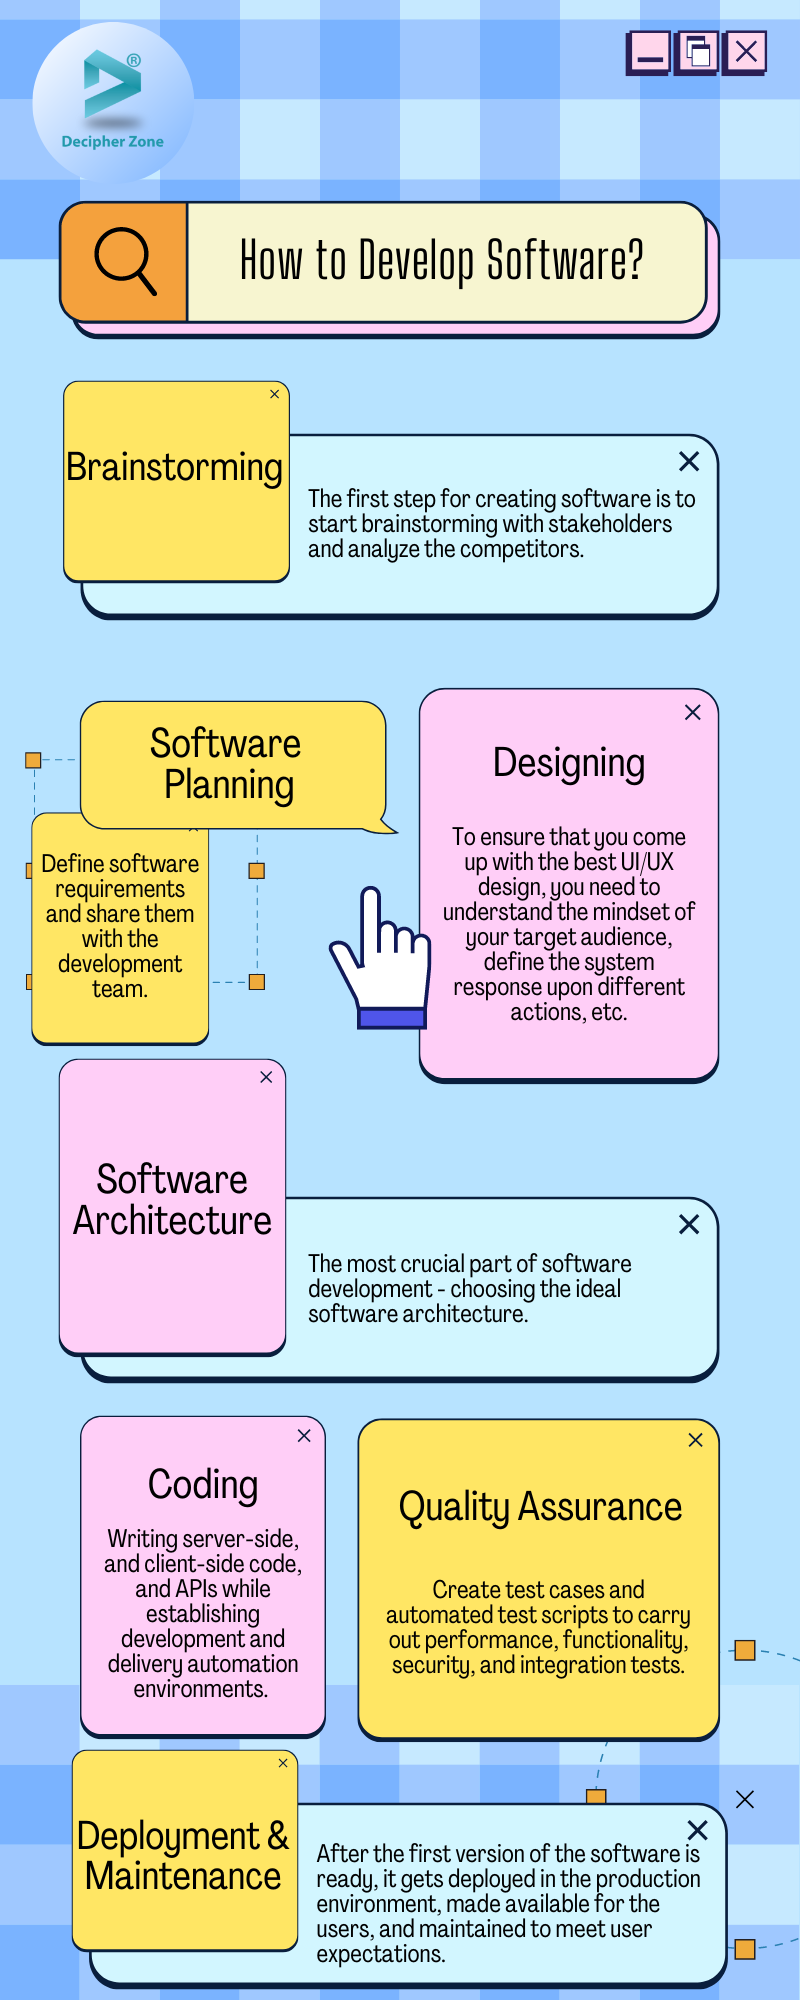 What Will Software Look Like Once Anyone Can Create It?